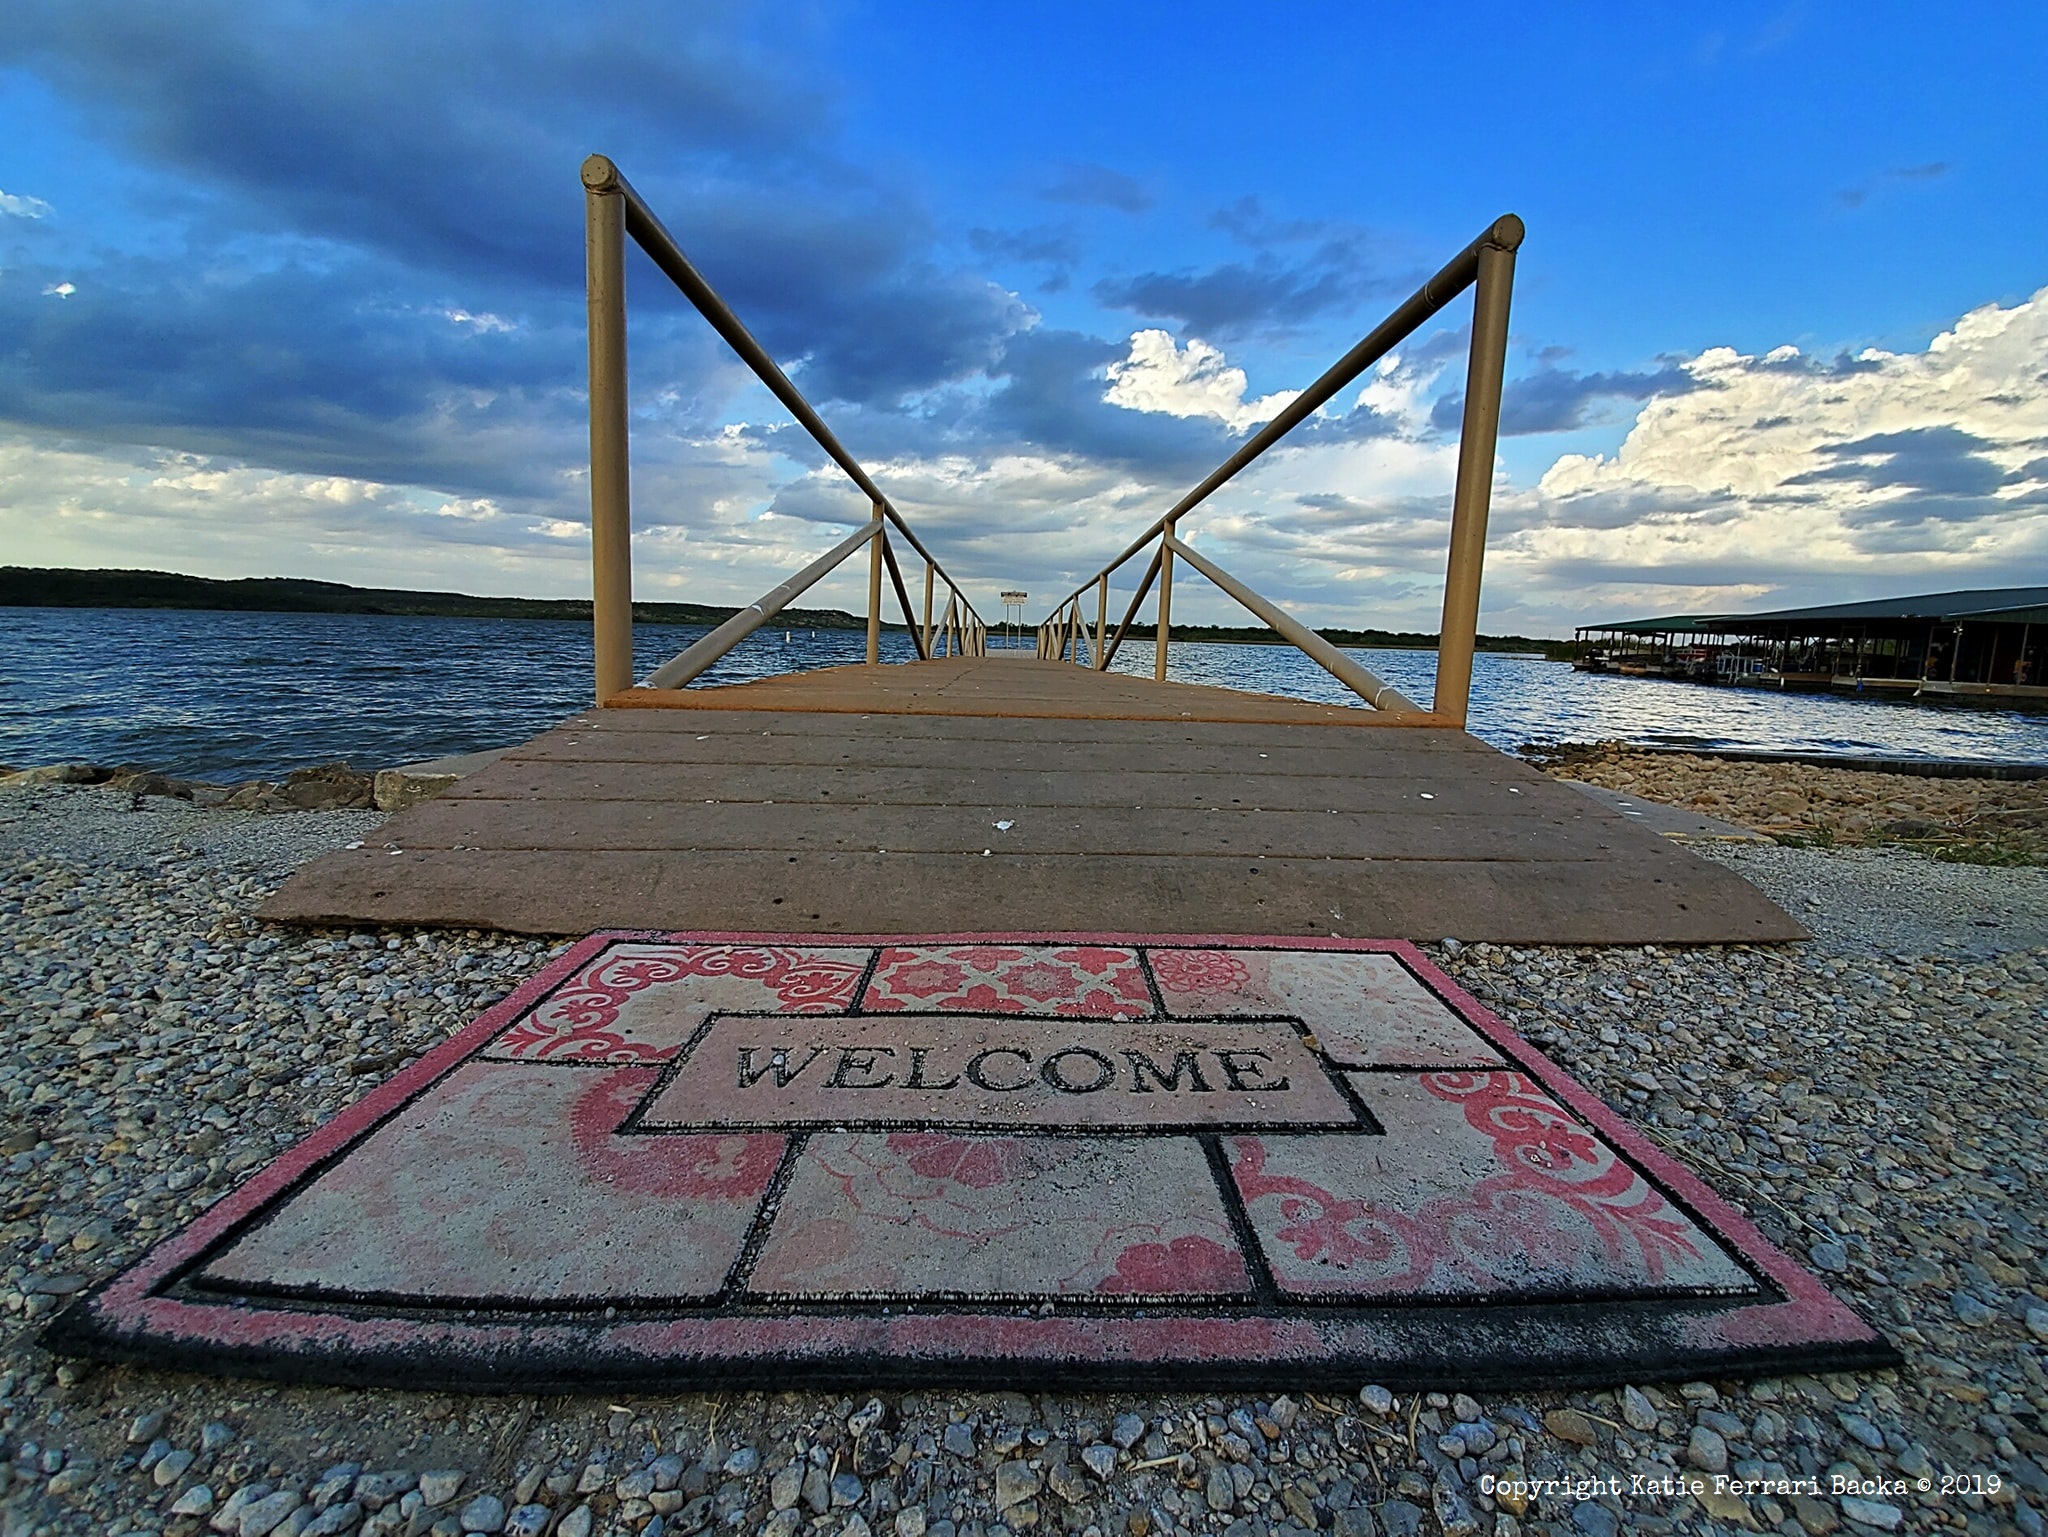 Landscape shot at the end of a dock with a welcome mat at Possum Kingdom Lake